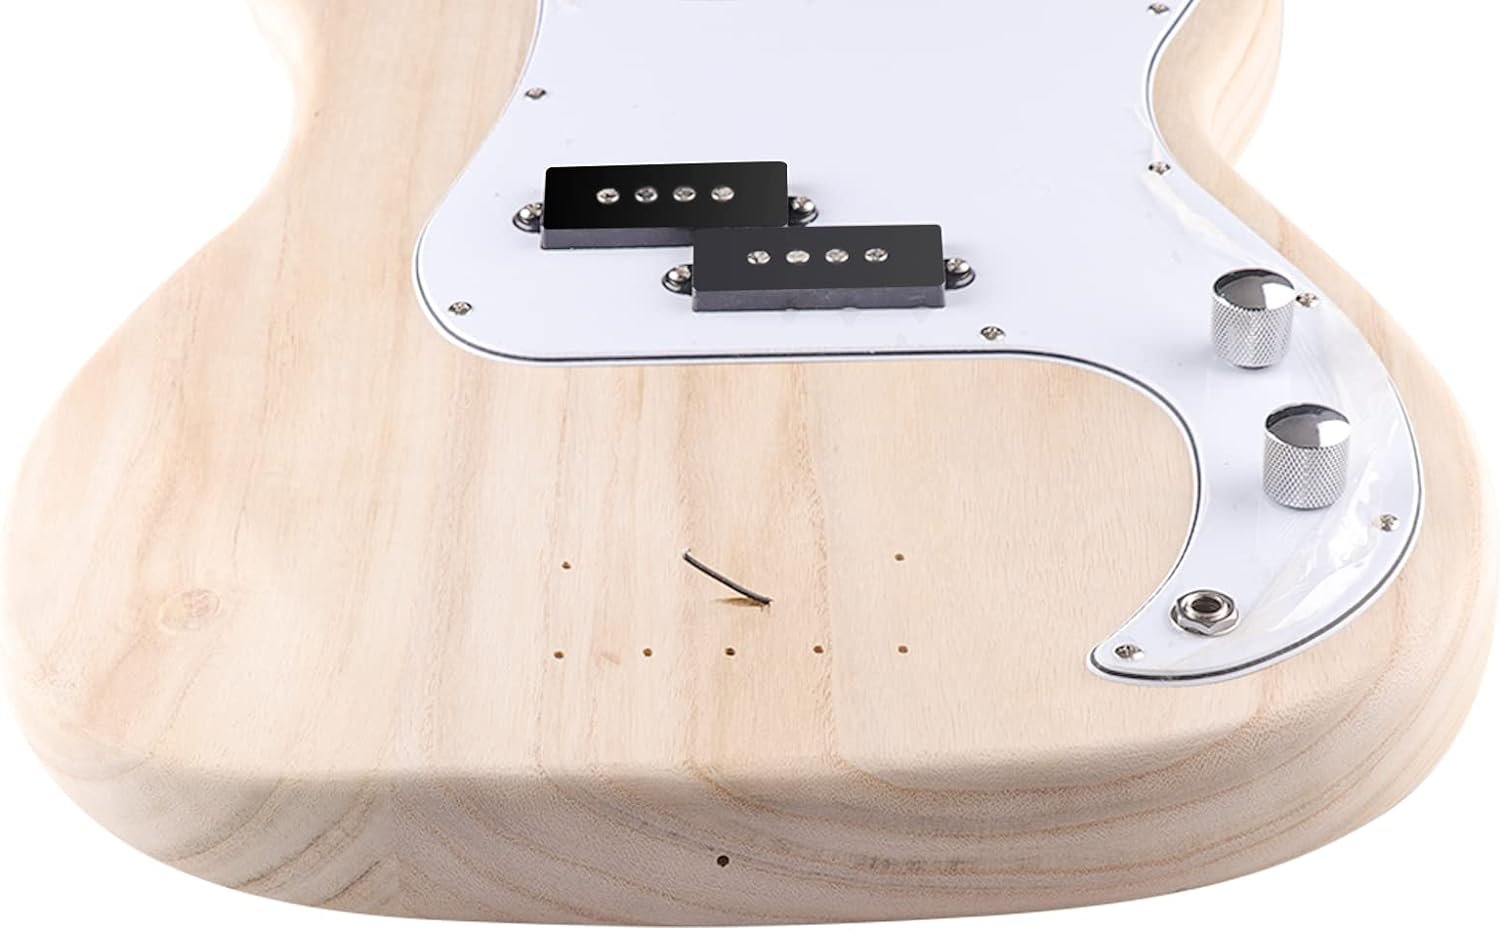 DIY Bass Guitar Kit Beginner Kits PB Bass Style 4 String Right Handed with Paulownia Body Hard Maple Neck DYED Poplar Laminated Fingerboard Chrome Hardware Build Your Own Guitar.